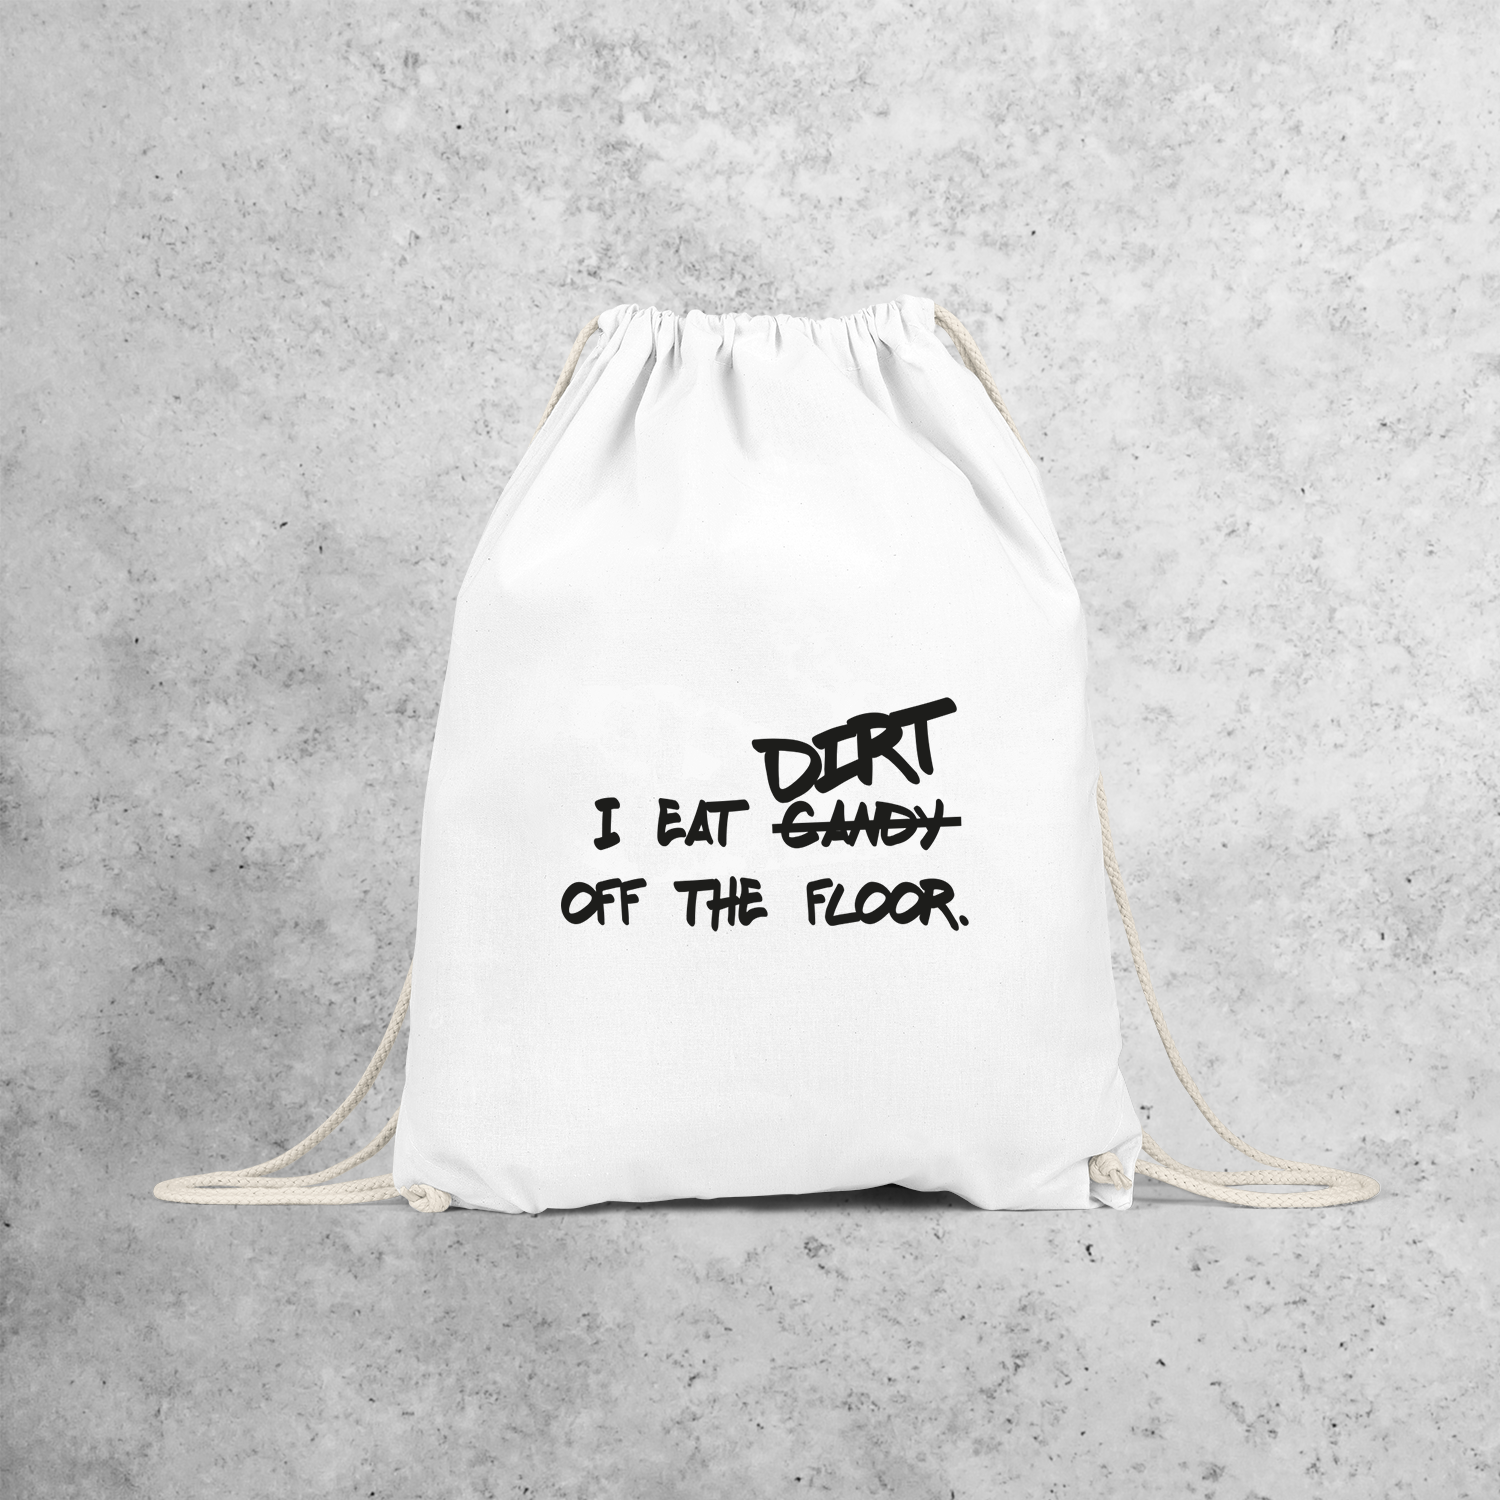 'I eat candy/dirt off the floor.' backpack